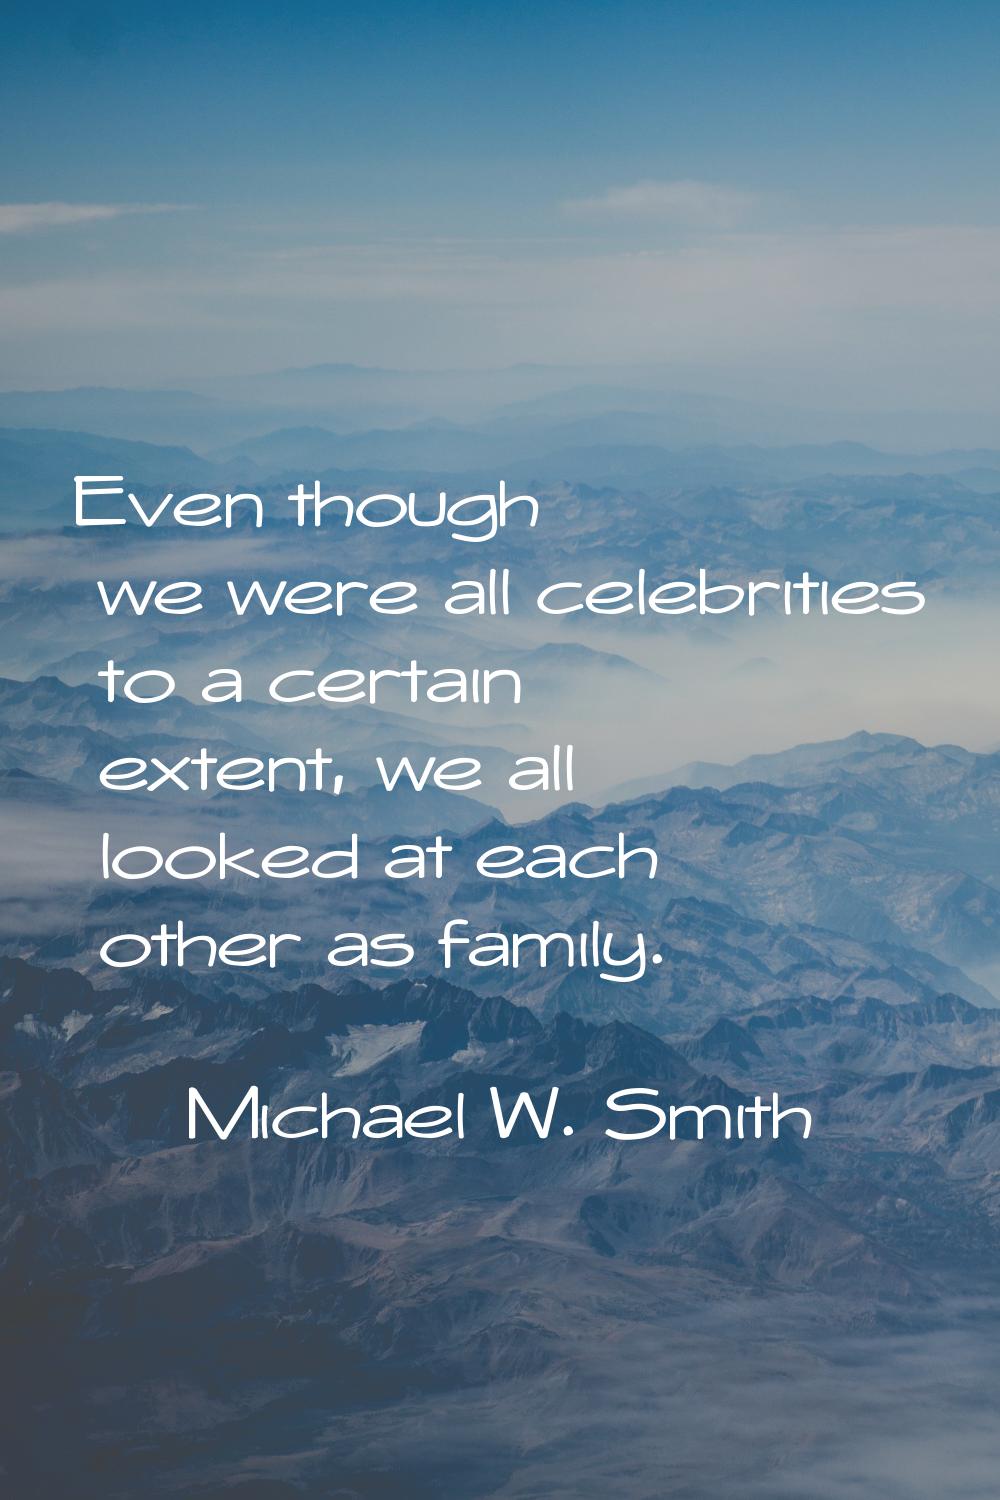 Even though we were all celebrities to a certain extent, we all looked at each other as family.